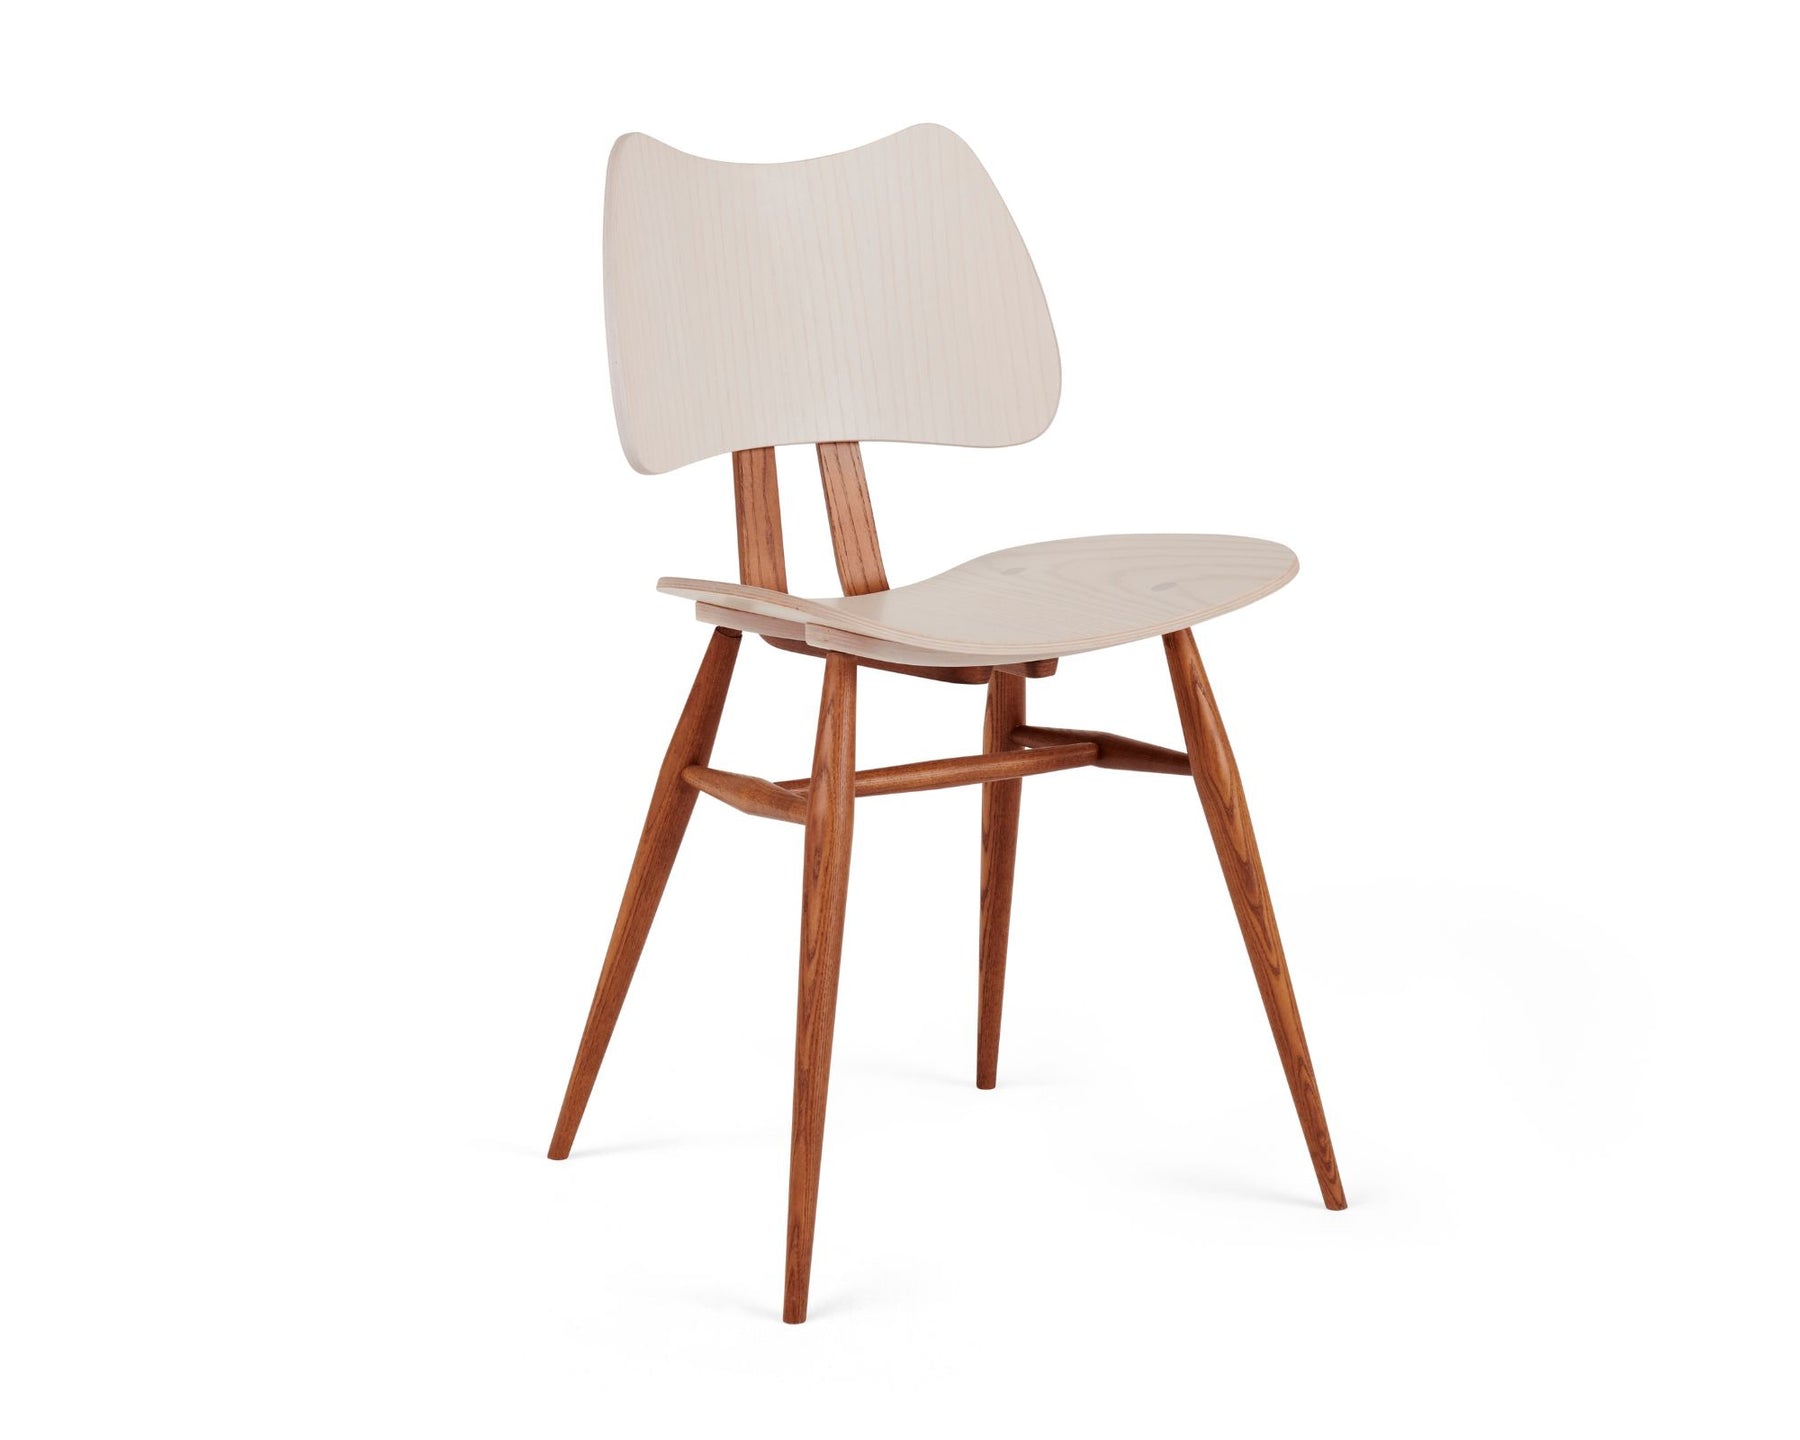 Mixed Wood Accent Chair | DSHOP